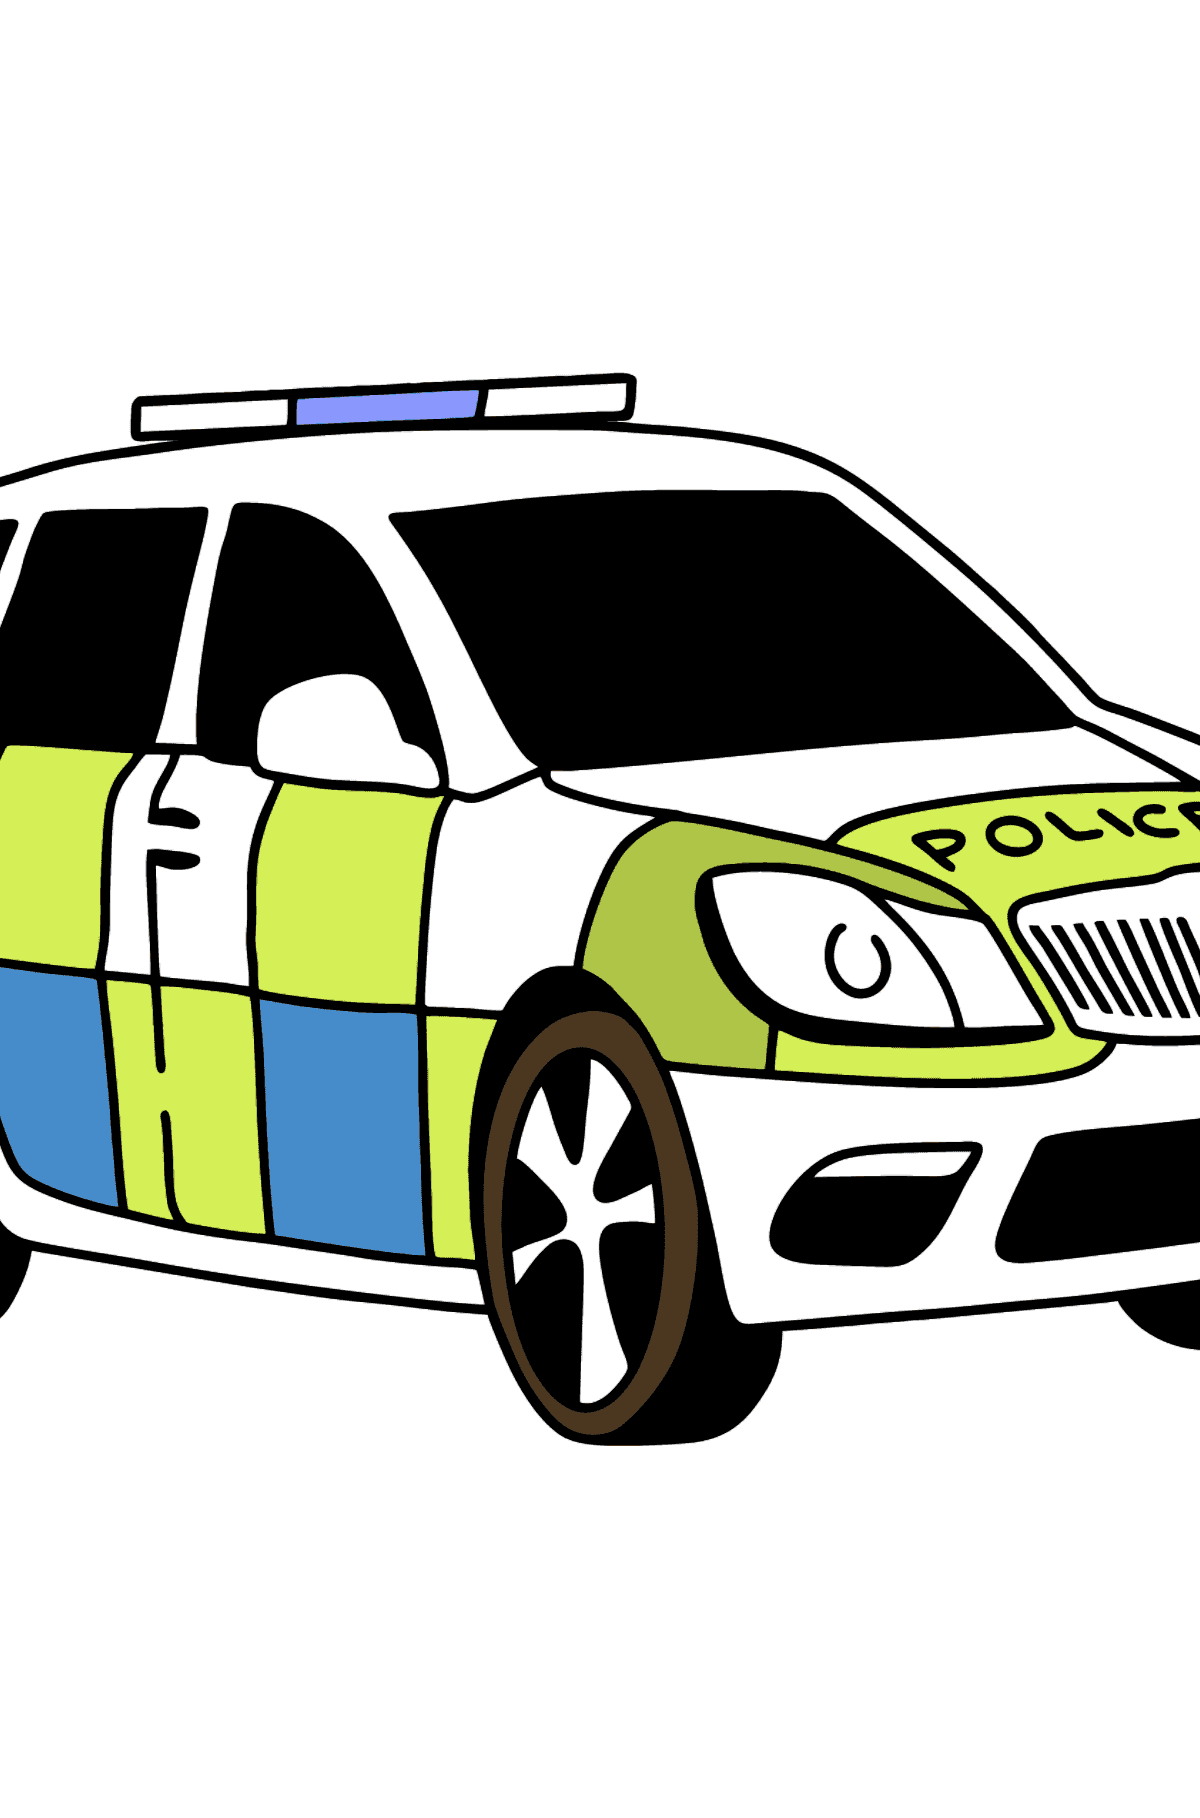 UK Police Car coloring page - Coloring Pages for Kids